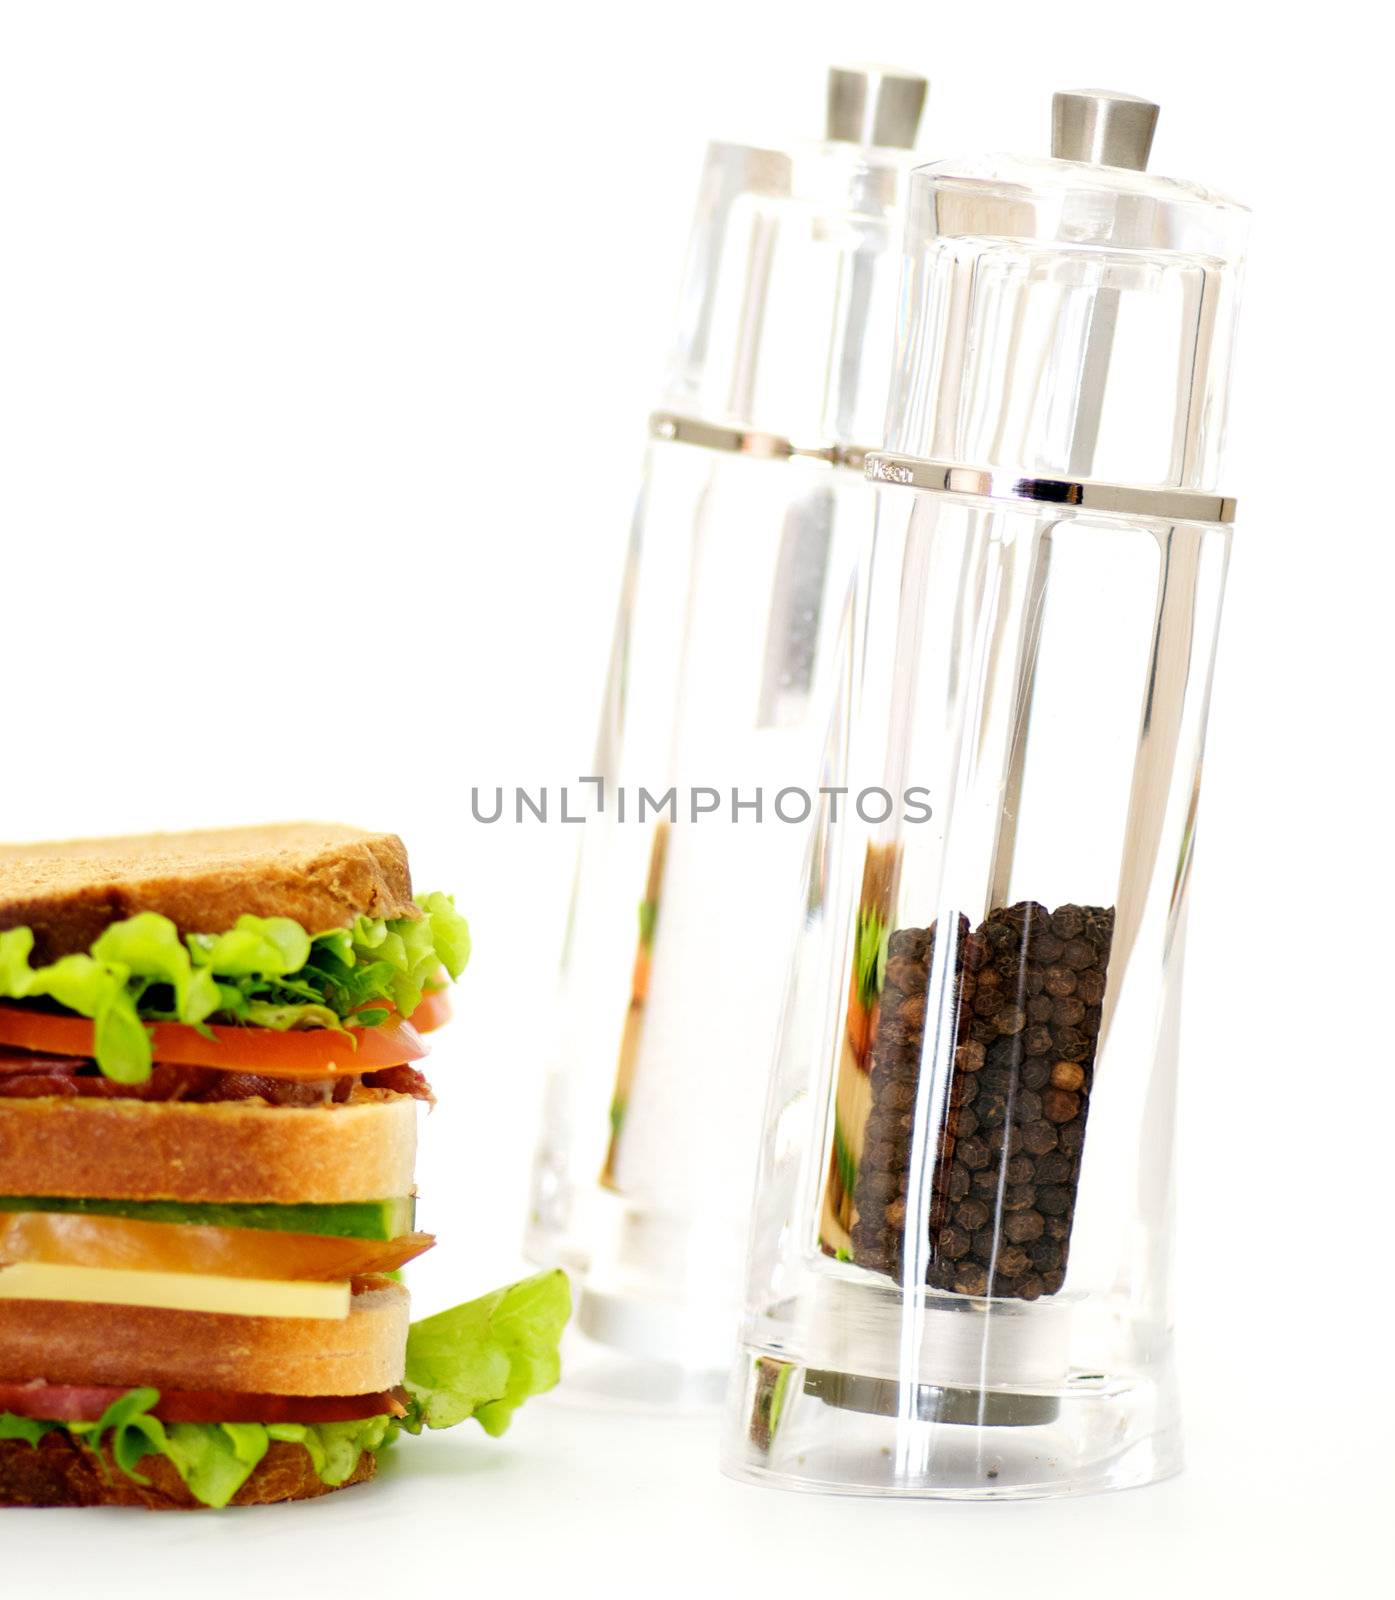 Classical BLT Club Sandwich with Saltcellar and pepperbox by zhekos